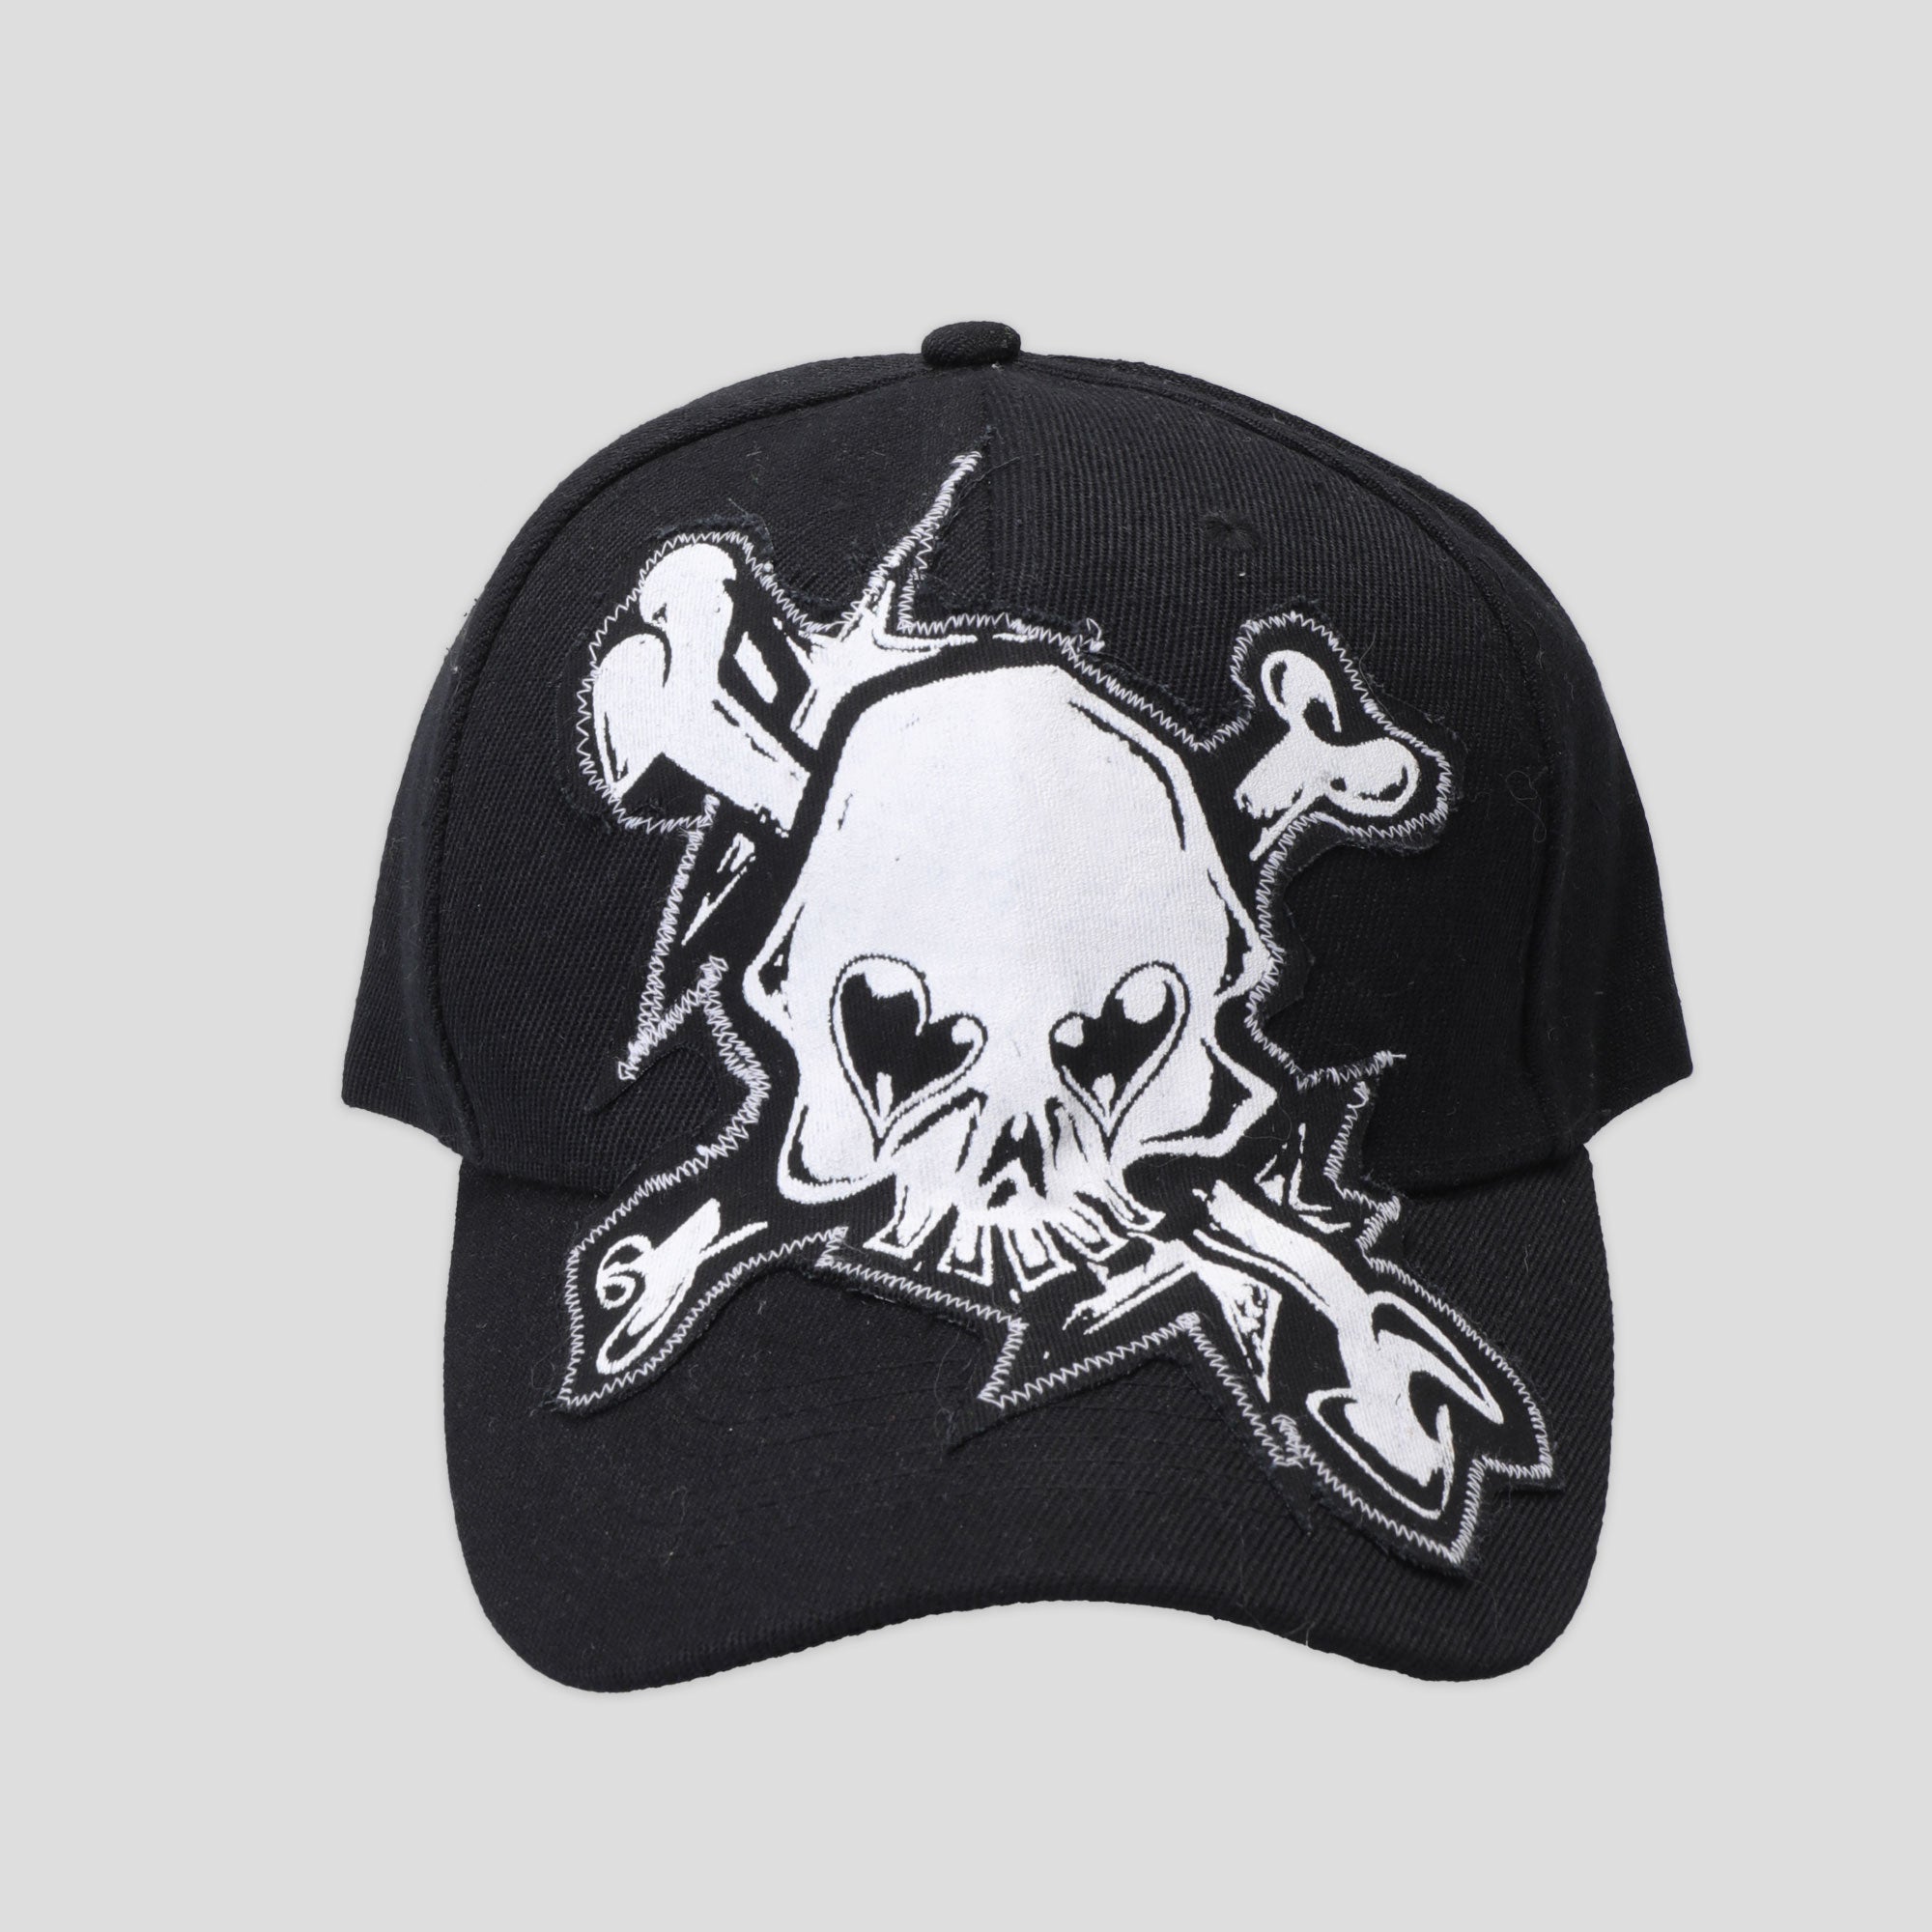 Personal Joint Skull Hat - Black